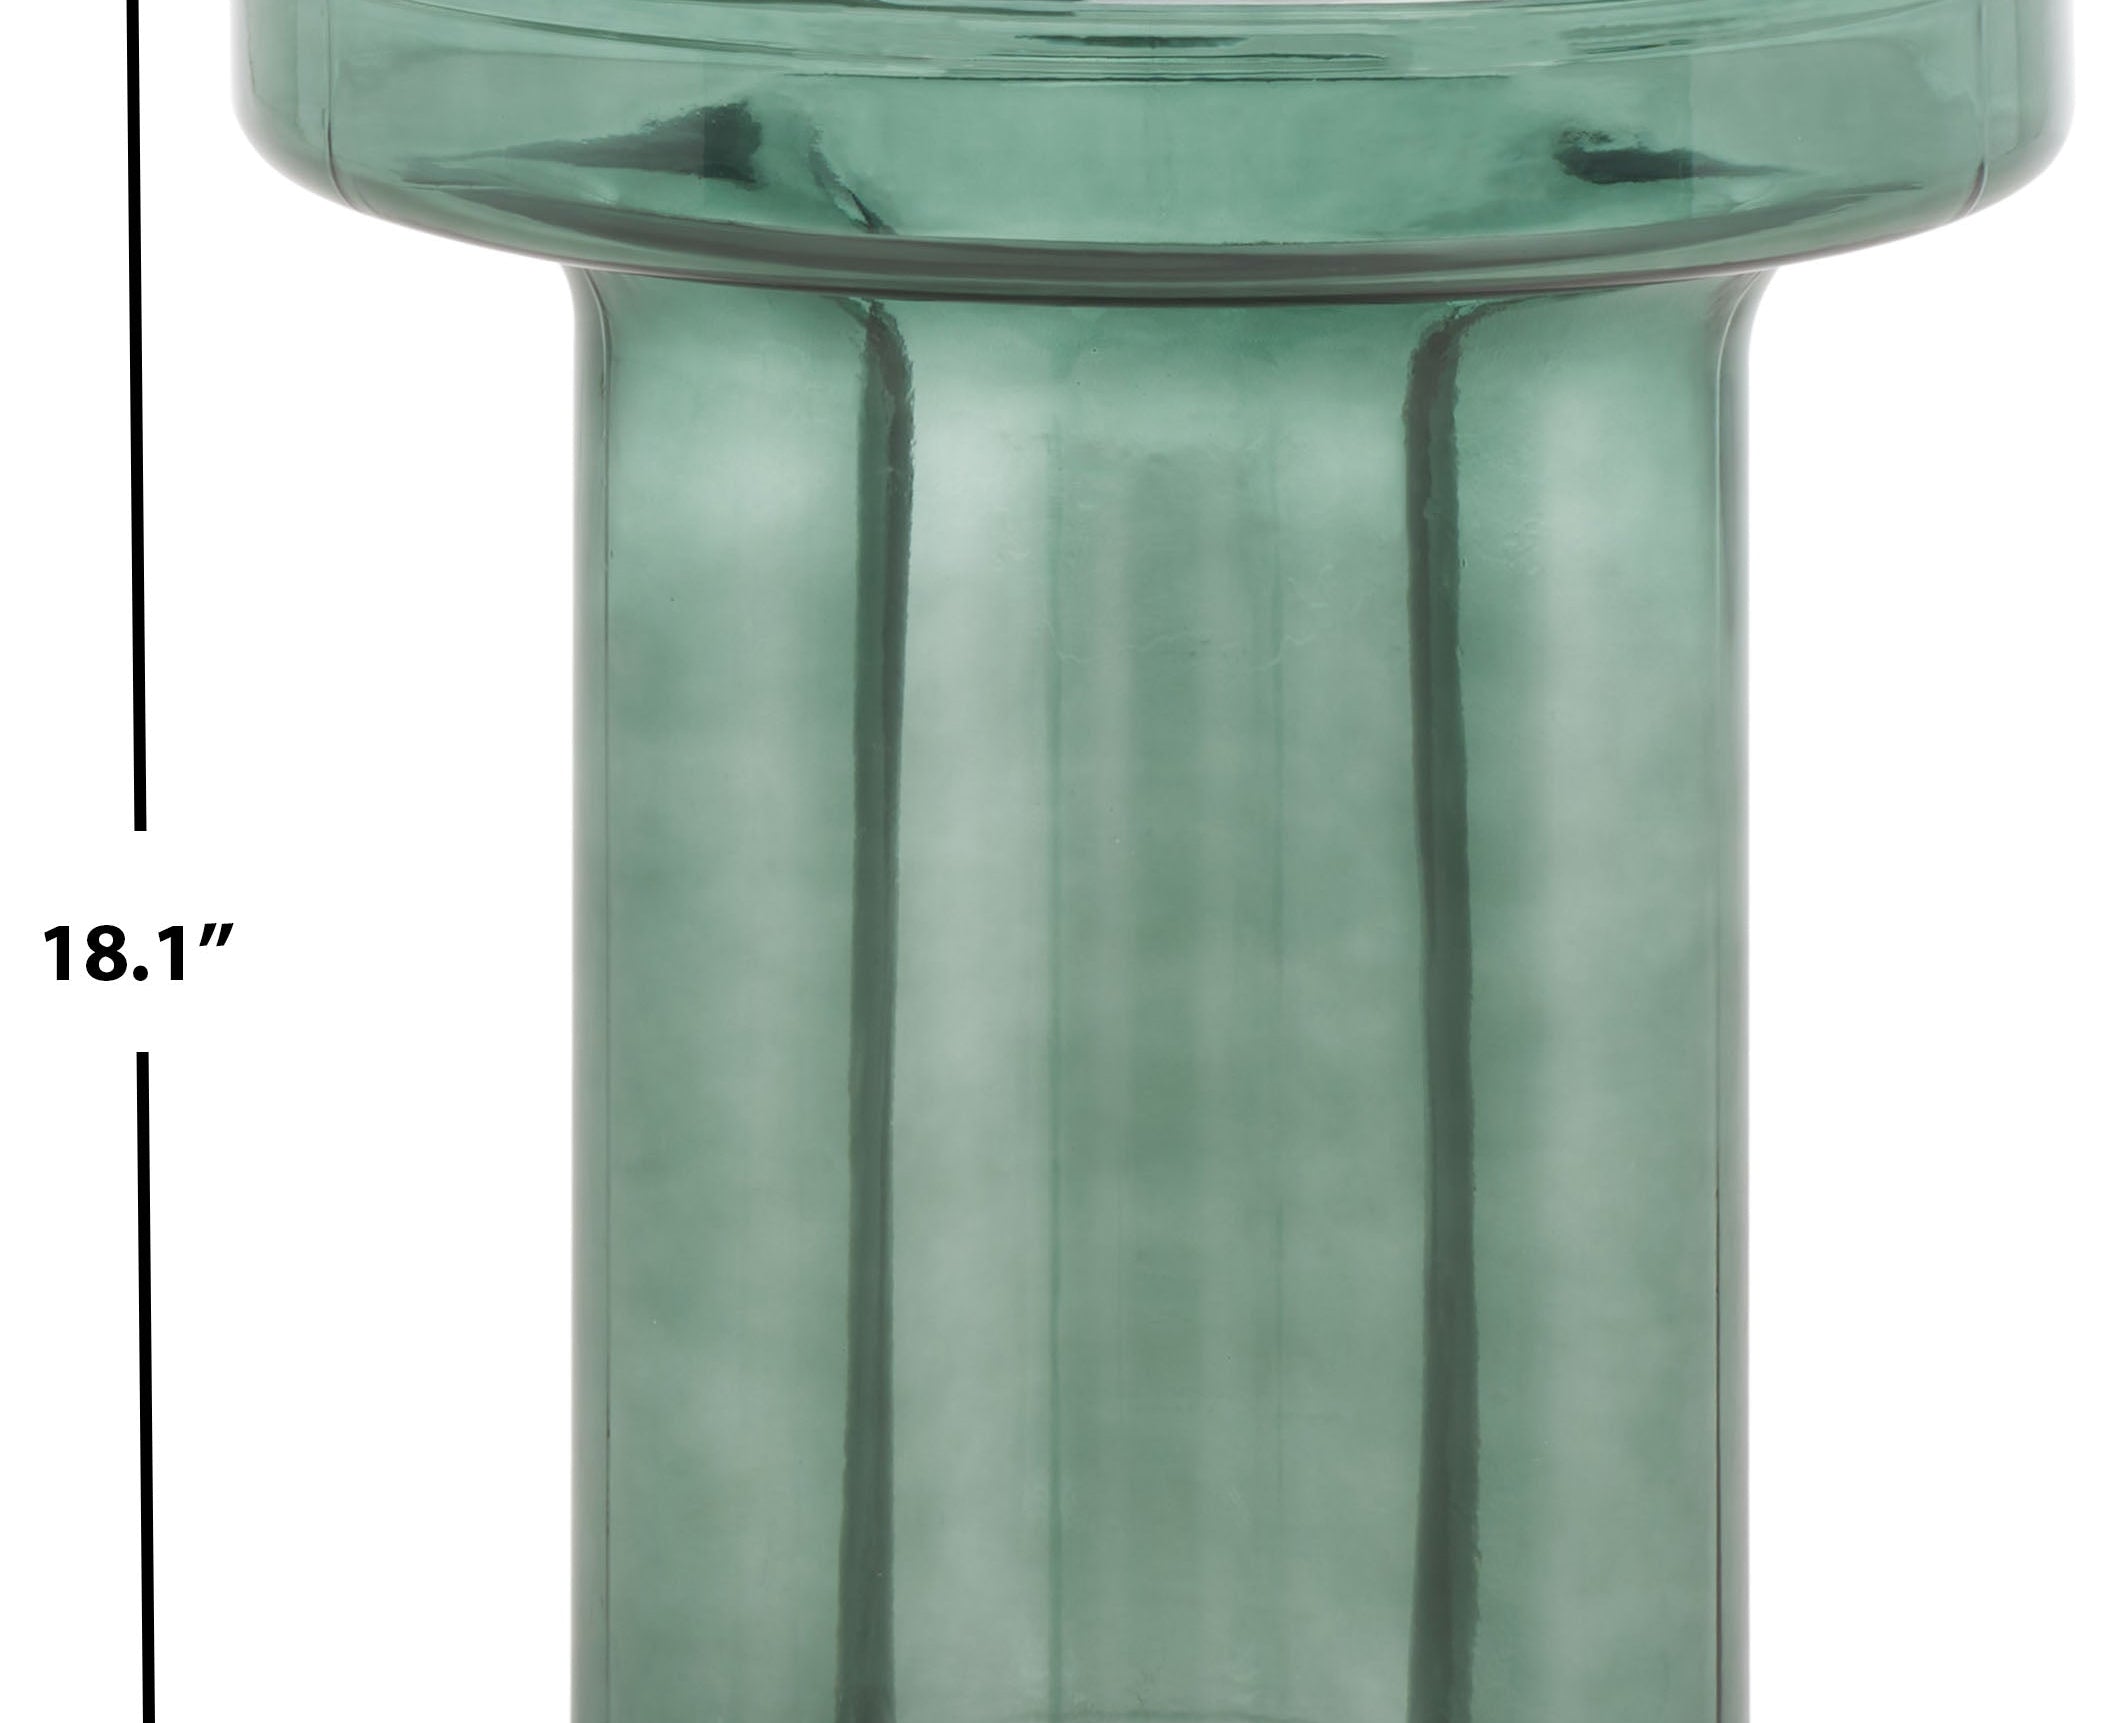 safavieh couture patterson glass accent table, sfv1201